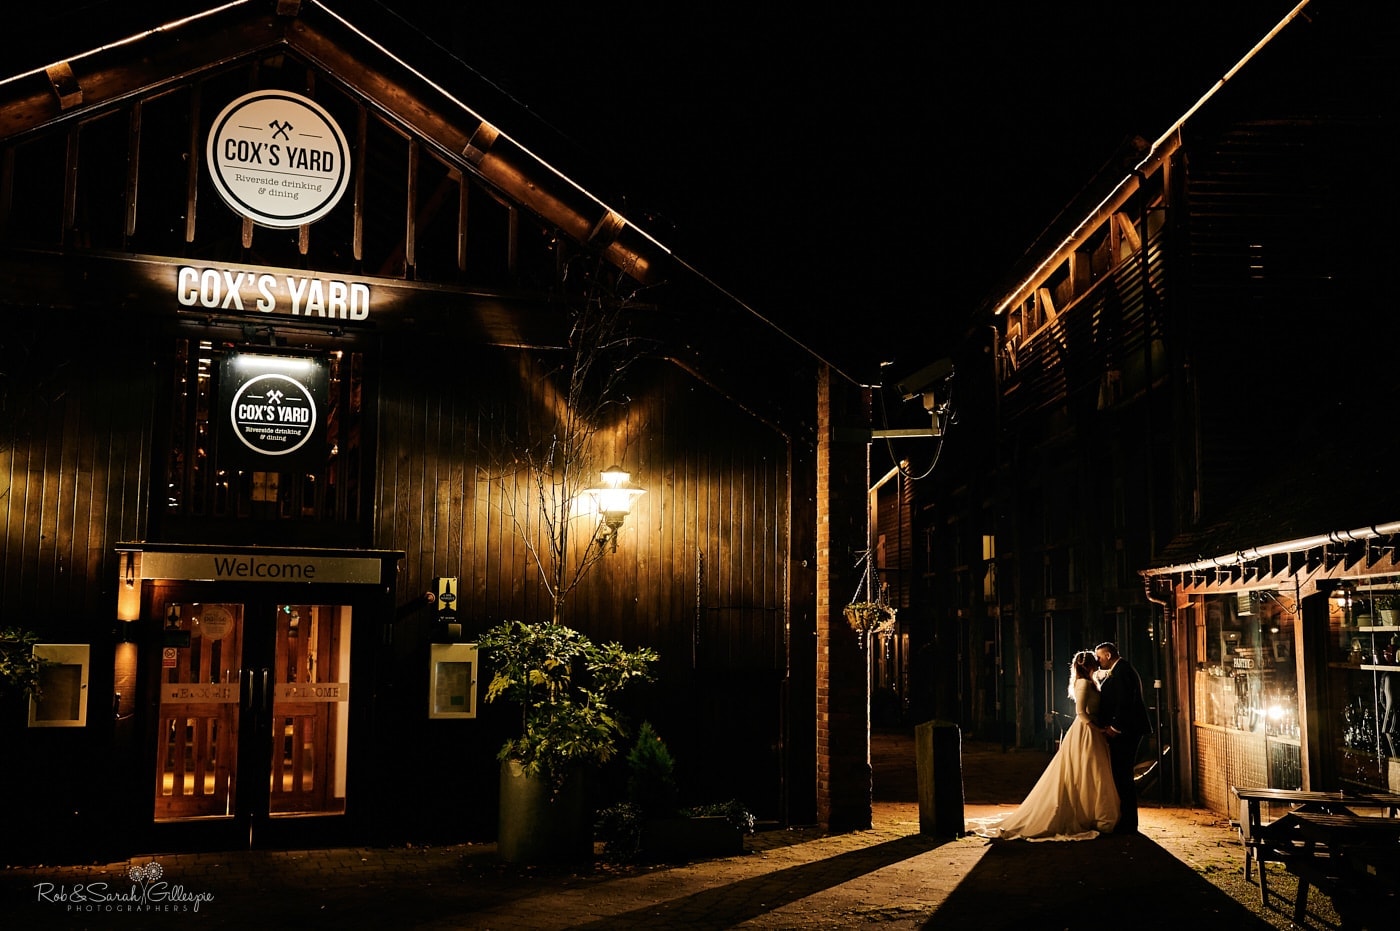 Nighttime photo bride and groom at Cox's Yard in Stratford upon Avon